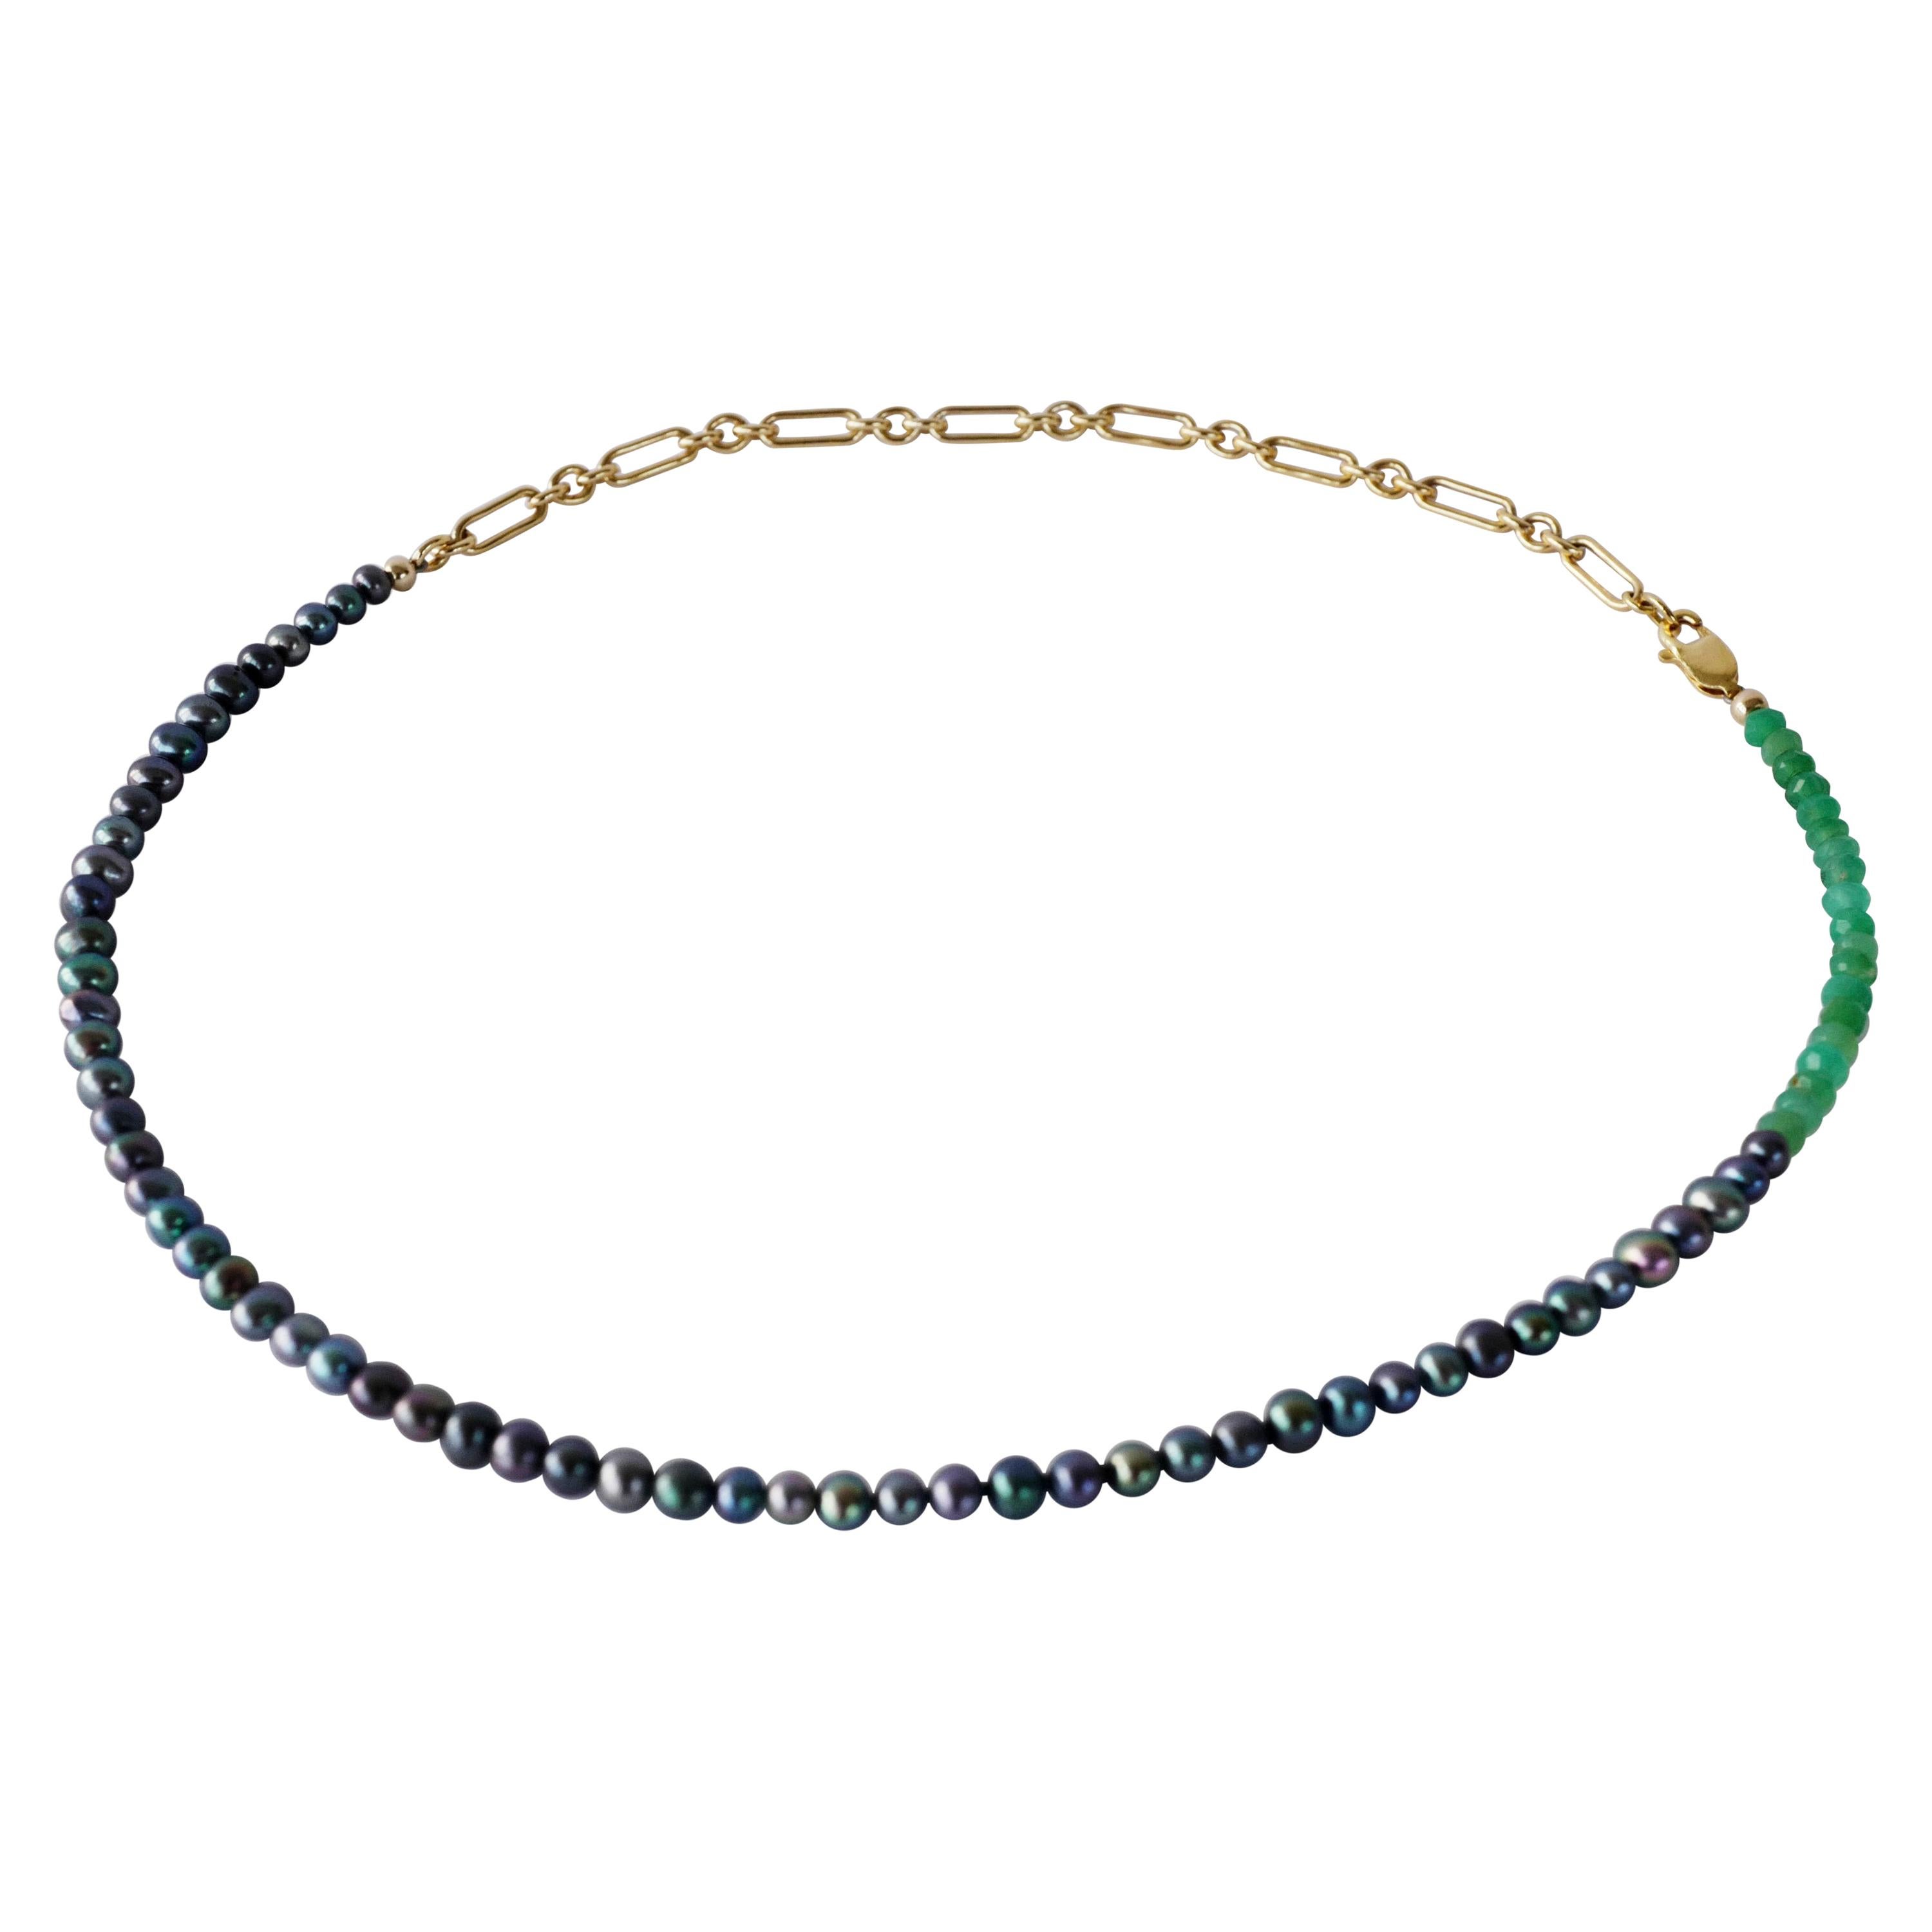 Round Cut Black Pearl Chrysoprase Choker Necklace Chain J Dauphin For Sale